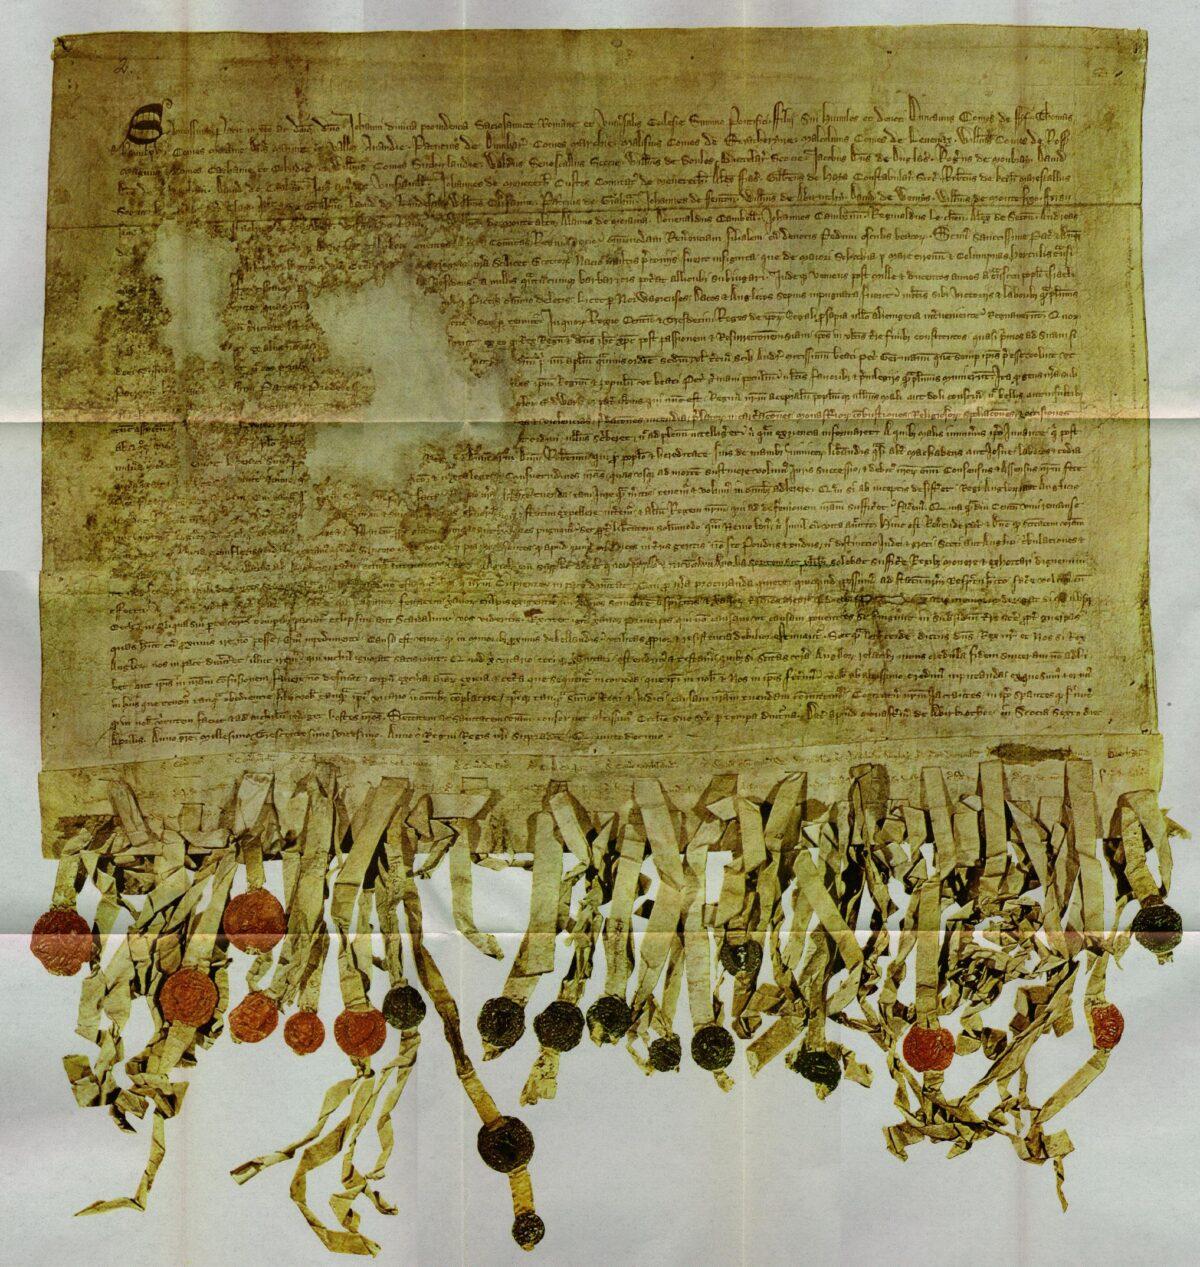 A reproduction of the "Tyninghame,” 1320, copy of the Declaration of Arbroath. (Public Domain)